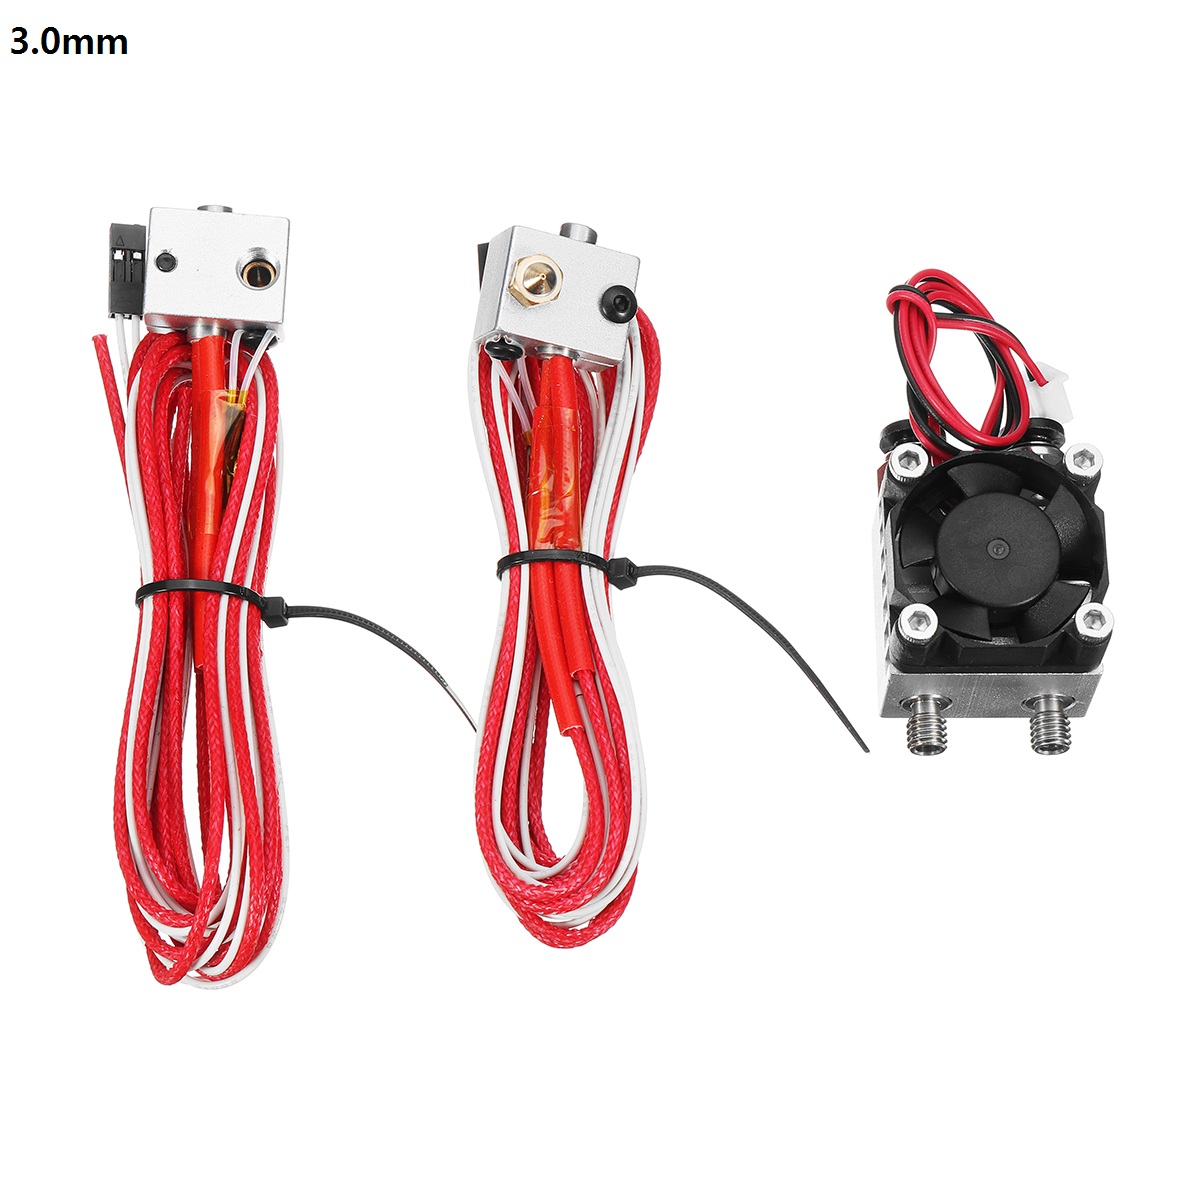 1.75mm/3.0mm Fialment 0.4mm Nozzle Upgraded Dual Head Extruder Kit for 3D Printer 16